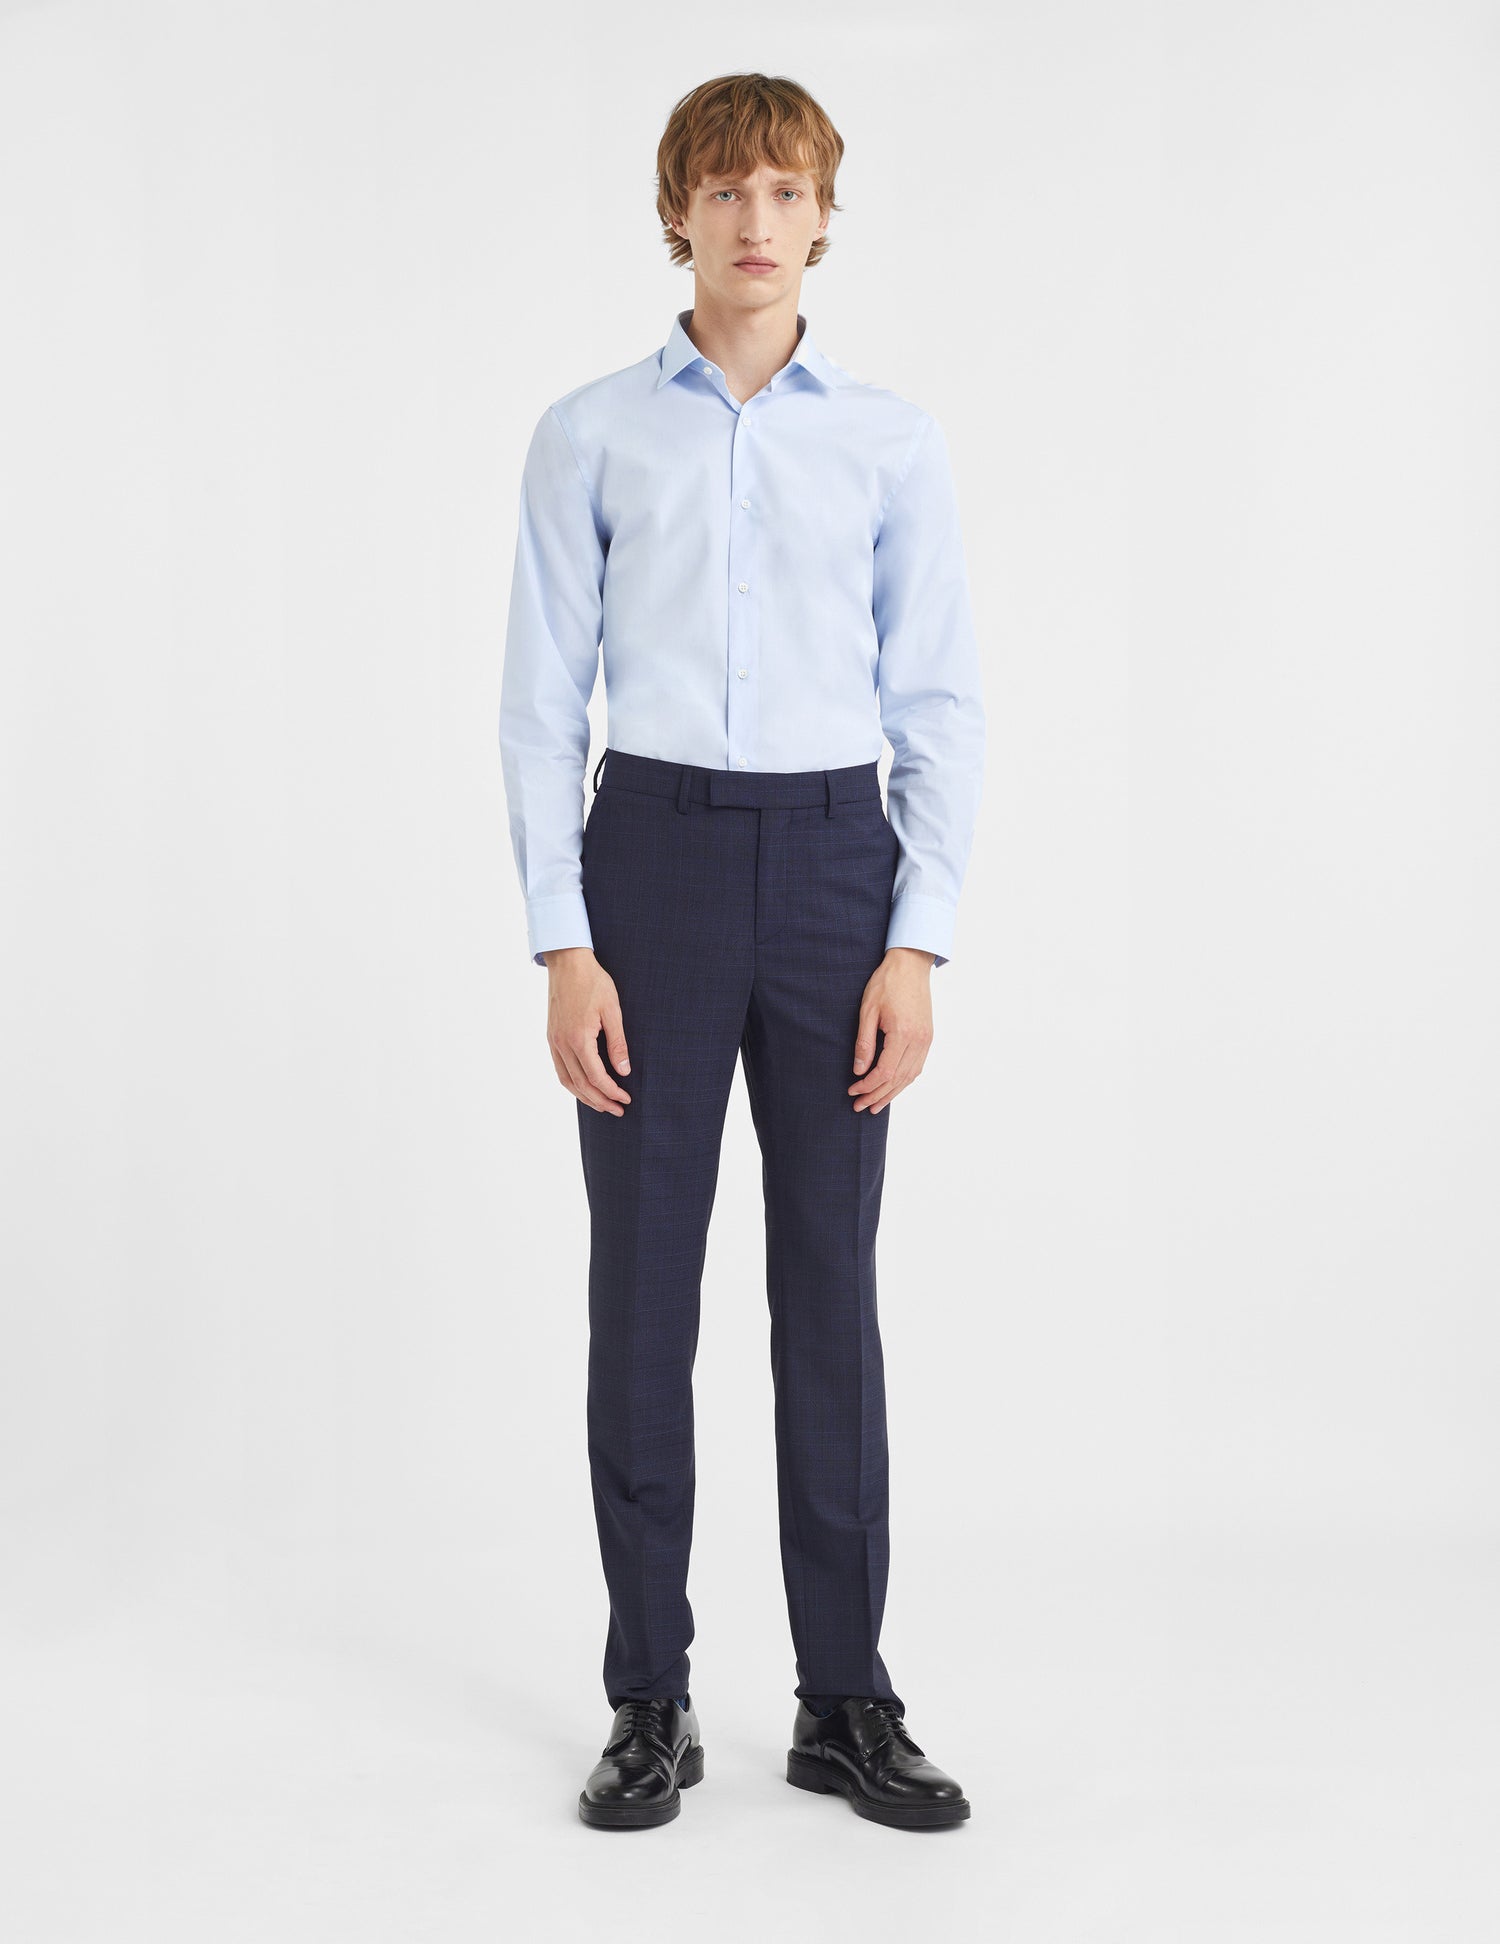 Semi-fitted blue shirt - Wire to wire - Figaret Collar#5